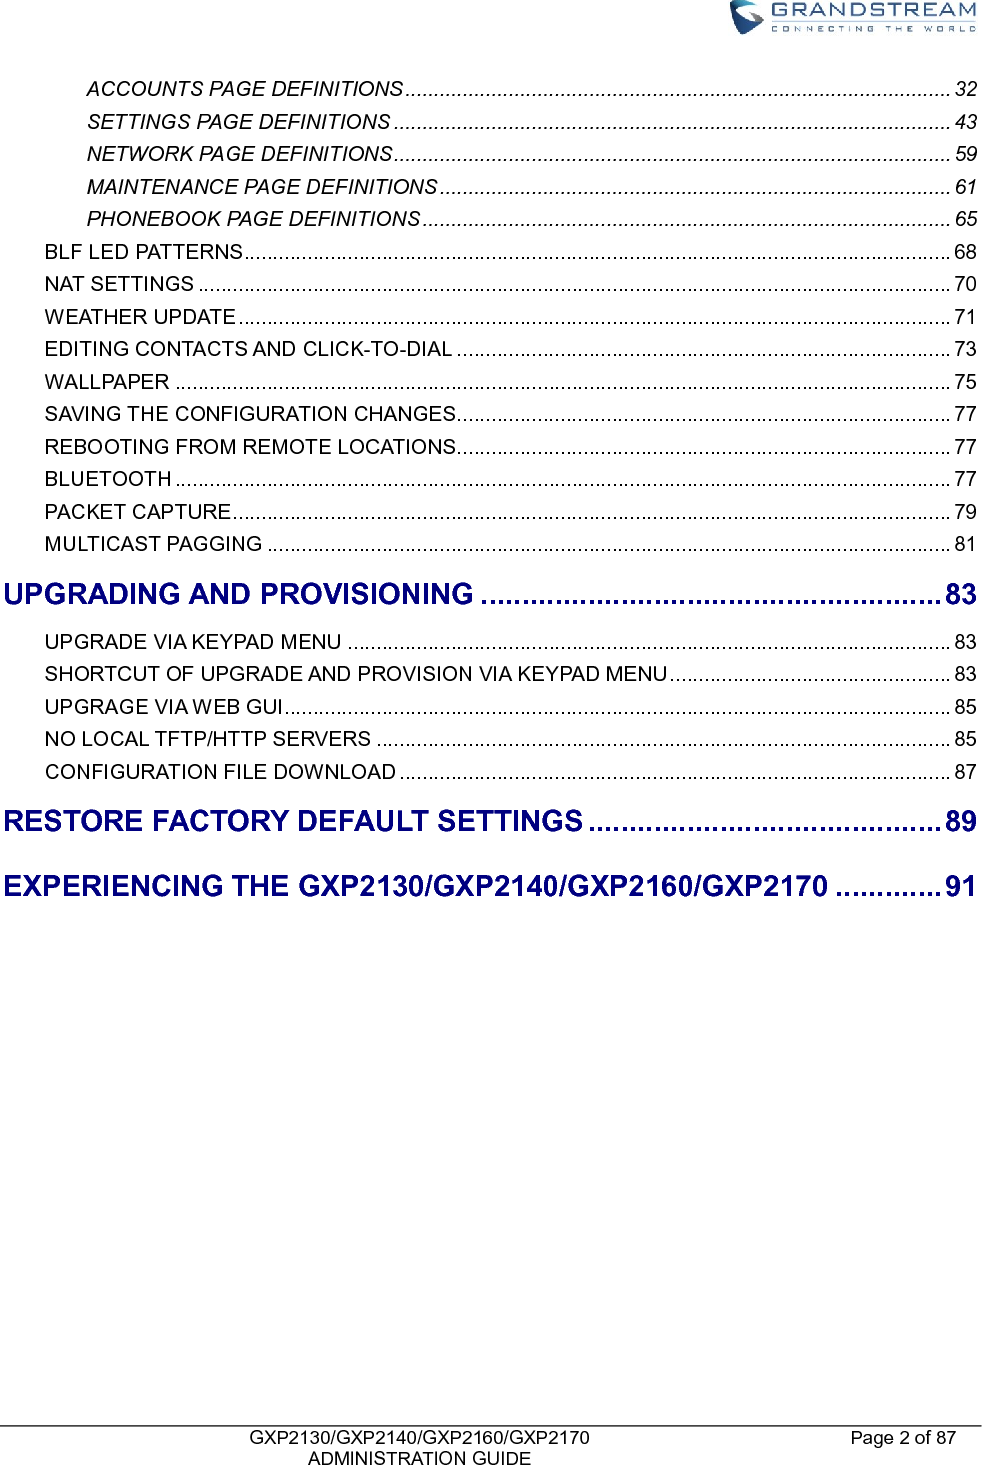    GXP2130/GXP2140/GXP2160/GXP2170   ADMINISTRATION GUIDE Page 2 of 87     ACCOUNTS PAGE DEFINITIONS ............................................................................................... 32 SETTINGS PAGE DEFINITIONS ................................................................................................. 43 NETWORK PAGE DEFINITIONS ................................................................................................. 59 MAINTENANCE PAGE DEFINITIONS ......................................................................................... 61 PHONEBOOK PAGE DEFINITIONS ............................................................................................ 65 BLF LED PATTERNS ........................................................................................................................... 68 NAT SETTINGS ................................................................................................................................... 70 WEATHER UPDATE ............................................................................................................................ 71 EDITING CONTACTS AND CLICK-TO-DIAL ...................................................................................... 73 WALLPAPER ....................................................................................................................................... 75 SAVING THE CONFIGURATION CHANGES...................................................................................... 77 REBOOTING FROM REMOTE LOCATIONS ...................................................................................... 77 BLUETOOTH ....................................................................................................................................... 77 PACKET CAPTURE ............................................................................................................................. 79 MULTICAST PAGGING ....................................................................................................................... 81 UPGRADING AND PROVISIONING ........................................................ 83 UPGRADE VIA KEYPAD MENU ......................................................................................................... 83 SHORTCUT OF UPGRADE AND PROVISION VIA KEYPAD MENU ................................................. 83 UPGRAGE VIA WEB GUI .................................................................................................................... 85 NO LOCAL TFTP/HTTP SERVERS .................................................................................................... 85 CONFIGURATION FILE DOWNLOAD ................................................................................................ 87 RESTORE FACTORY DEFAULT SETTINGS ........................................... 89 EXPERIENCING THE GXP2130/GXP2140/GXP2160/GXP2170 ............. 91           